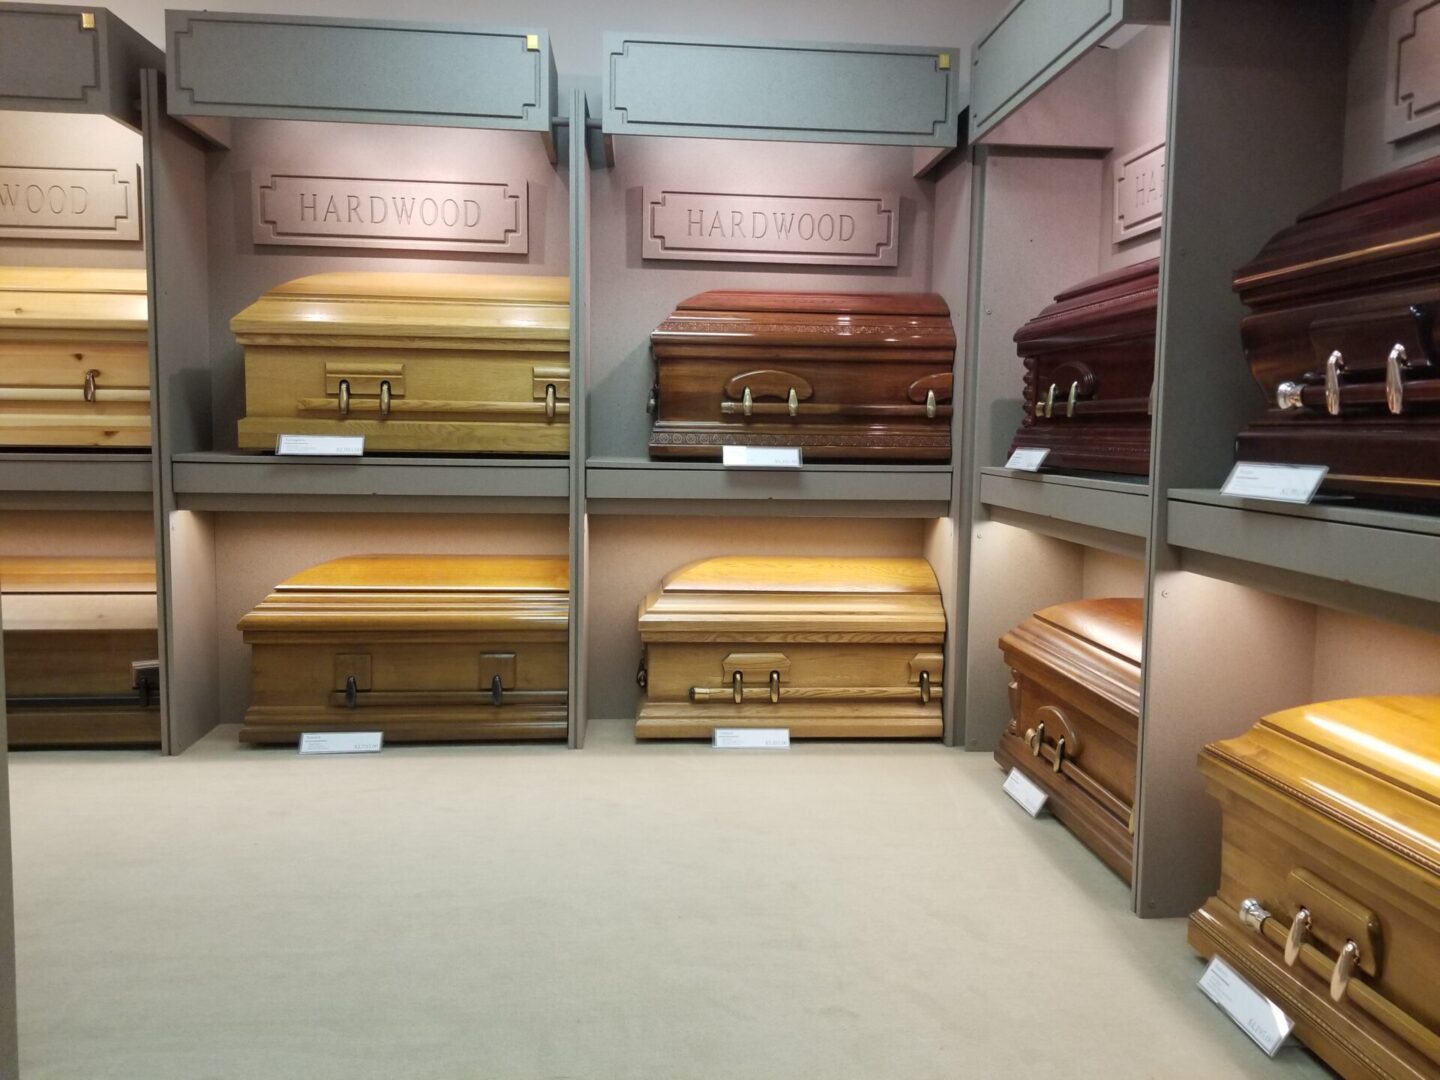 Charter Funeral Home